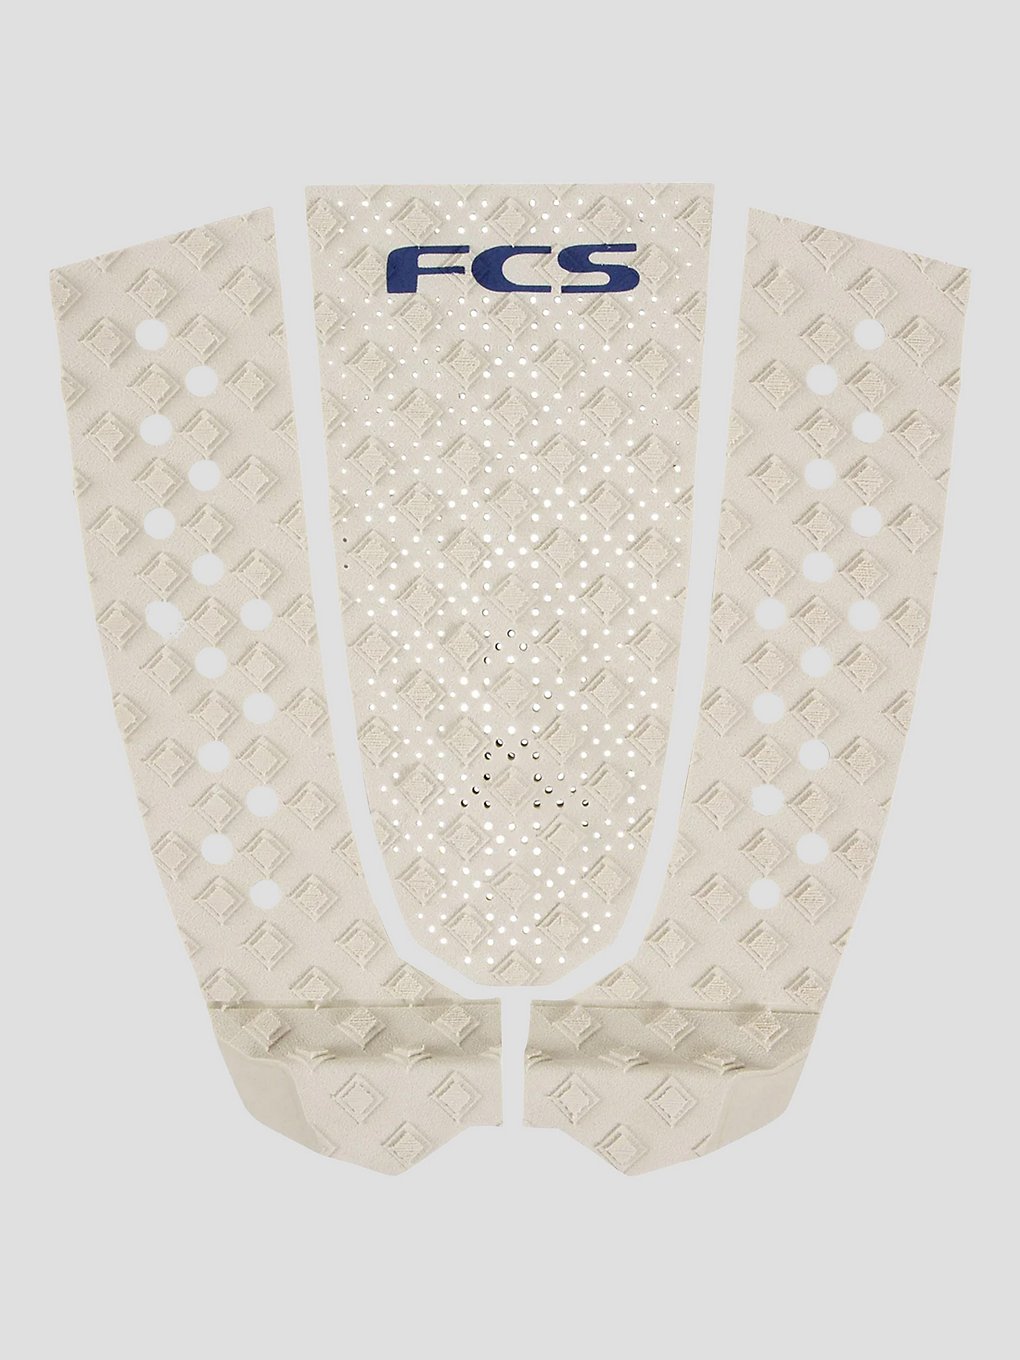 FCS T-3 Eco Traction Pad gris